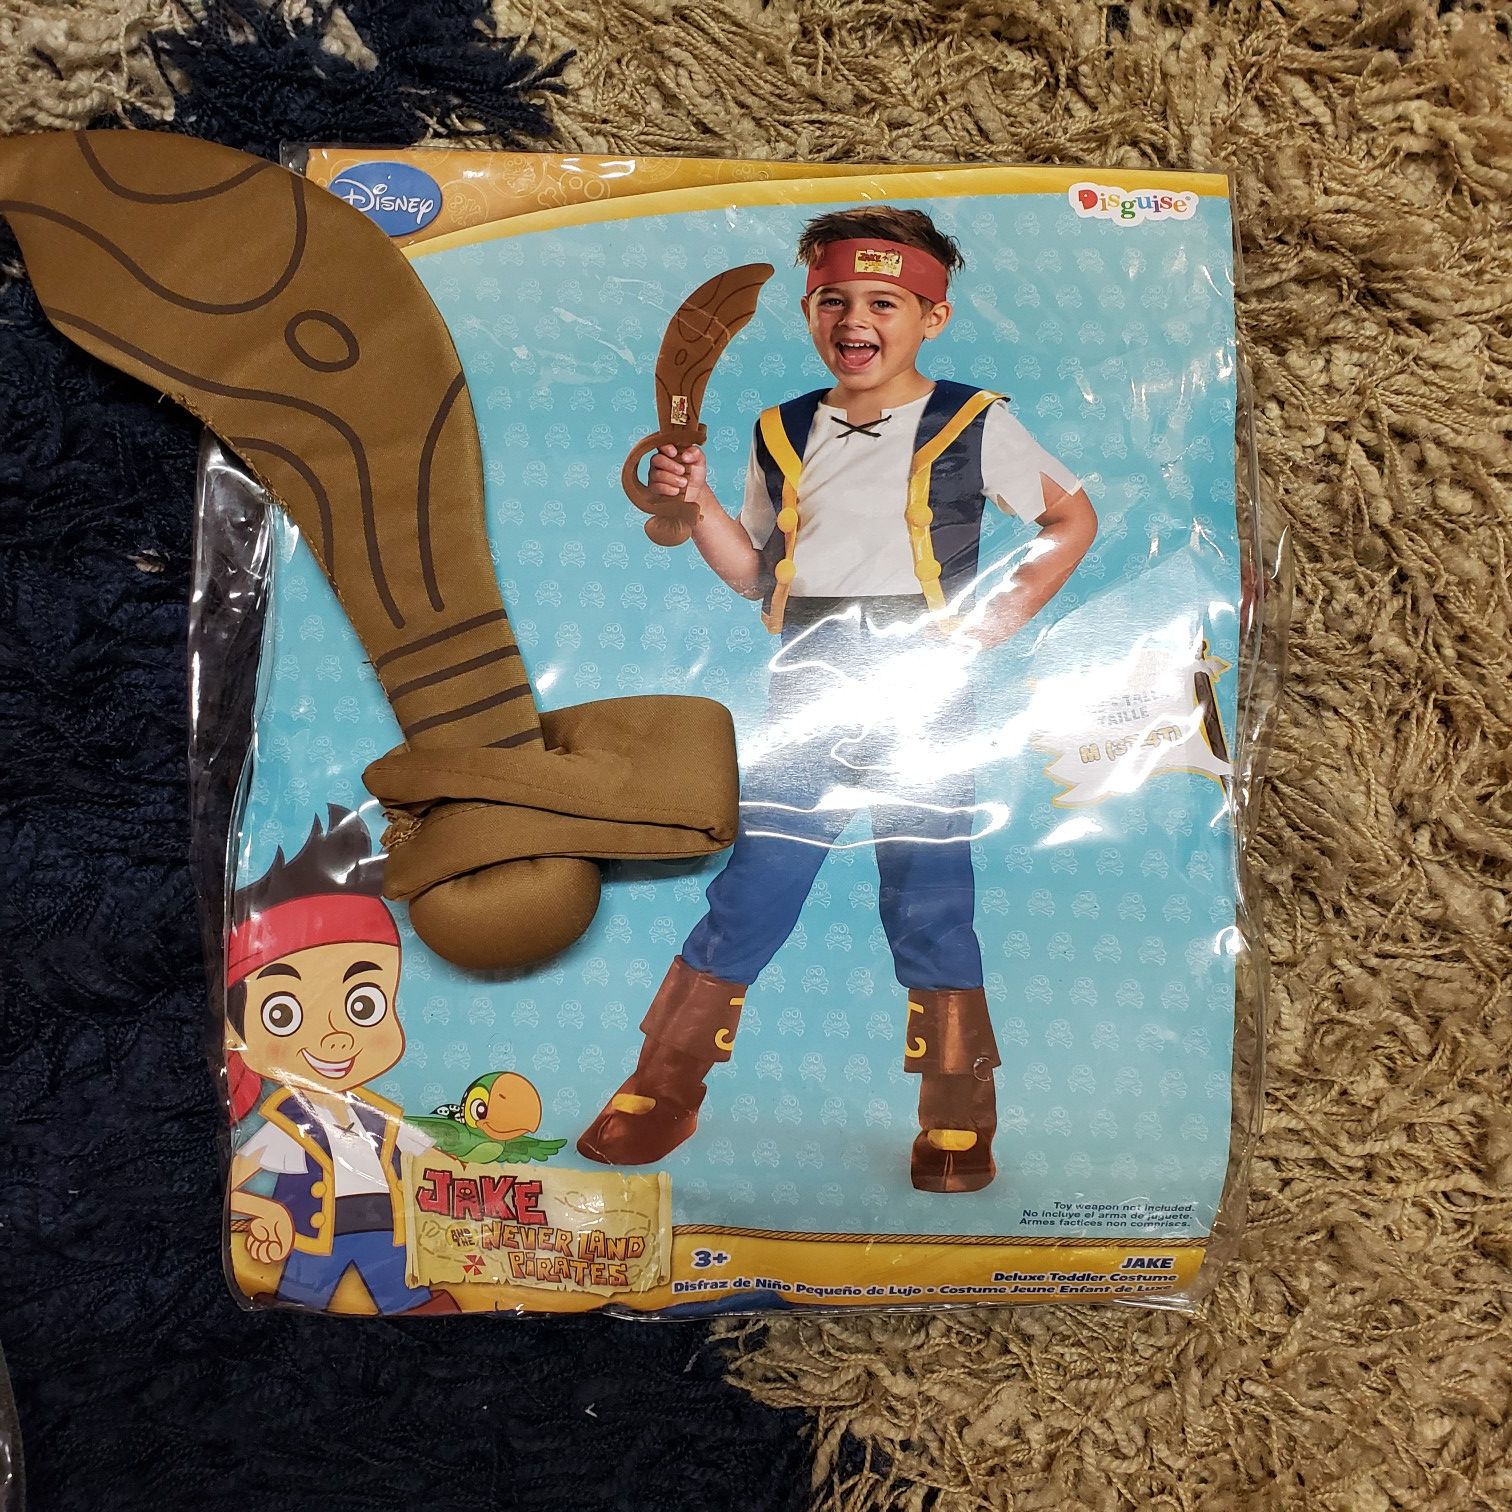 Jake and the never land pirates costume